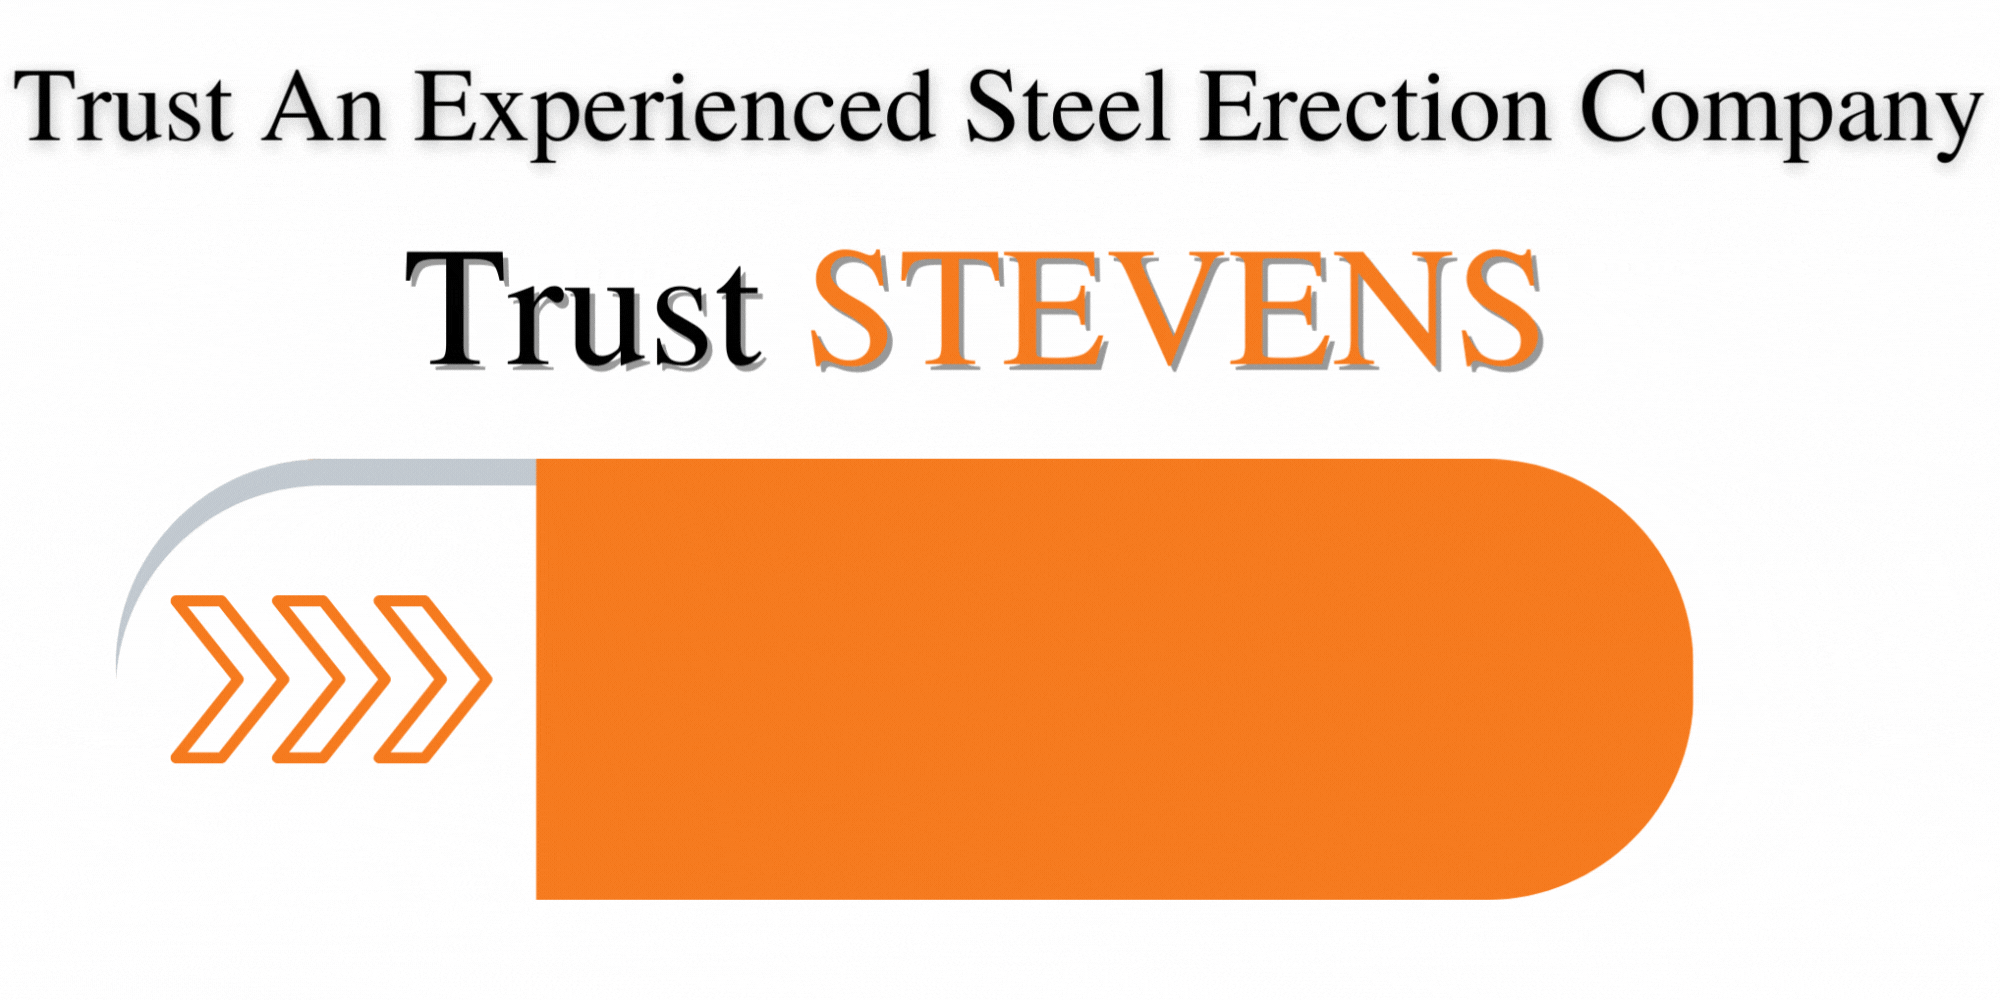 Trust An Experienced Steel Erection Company